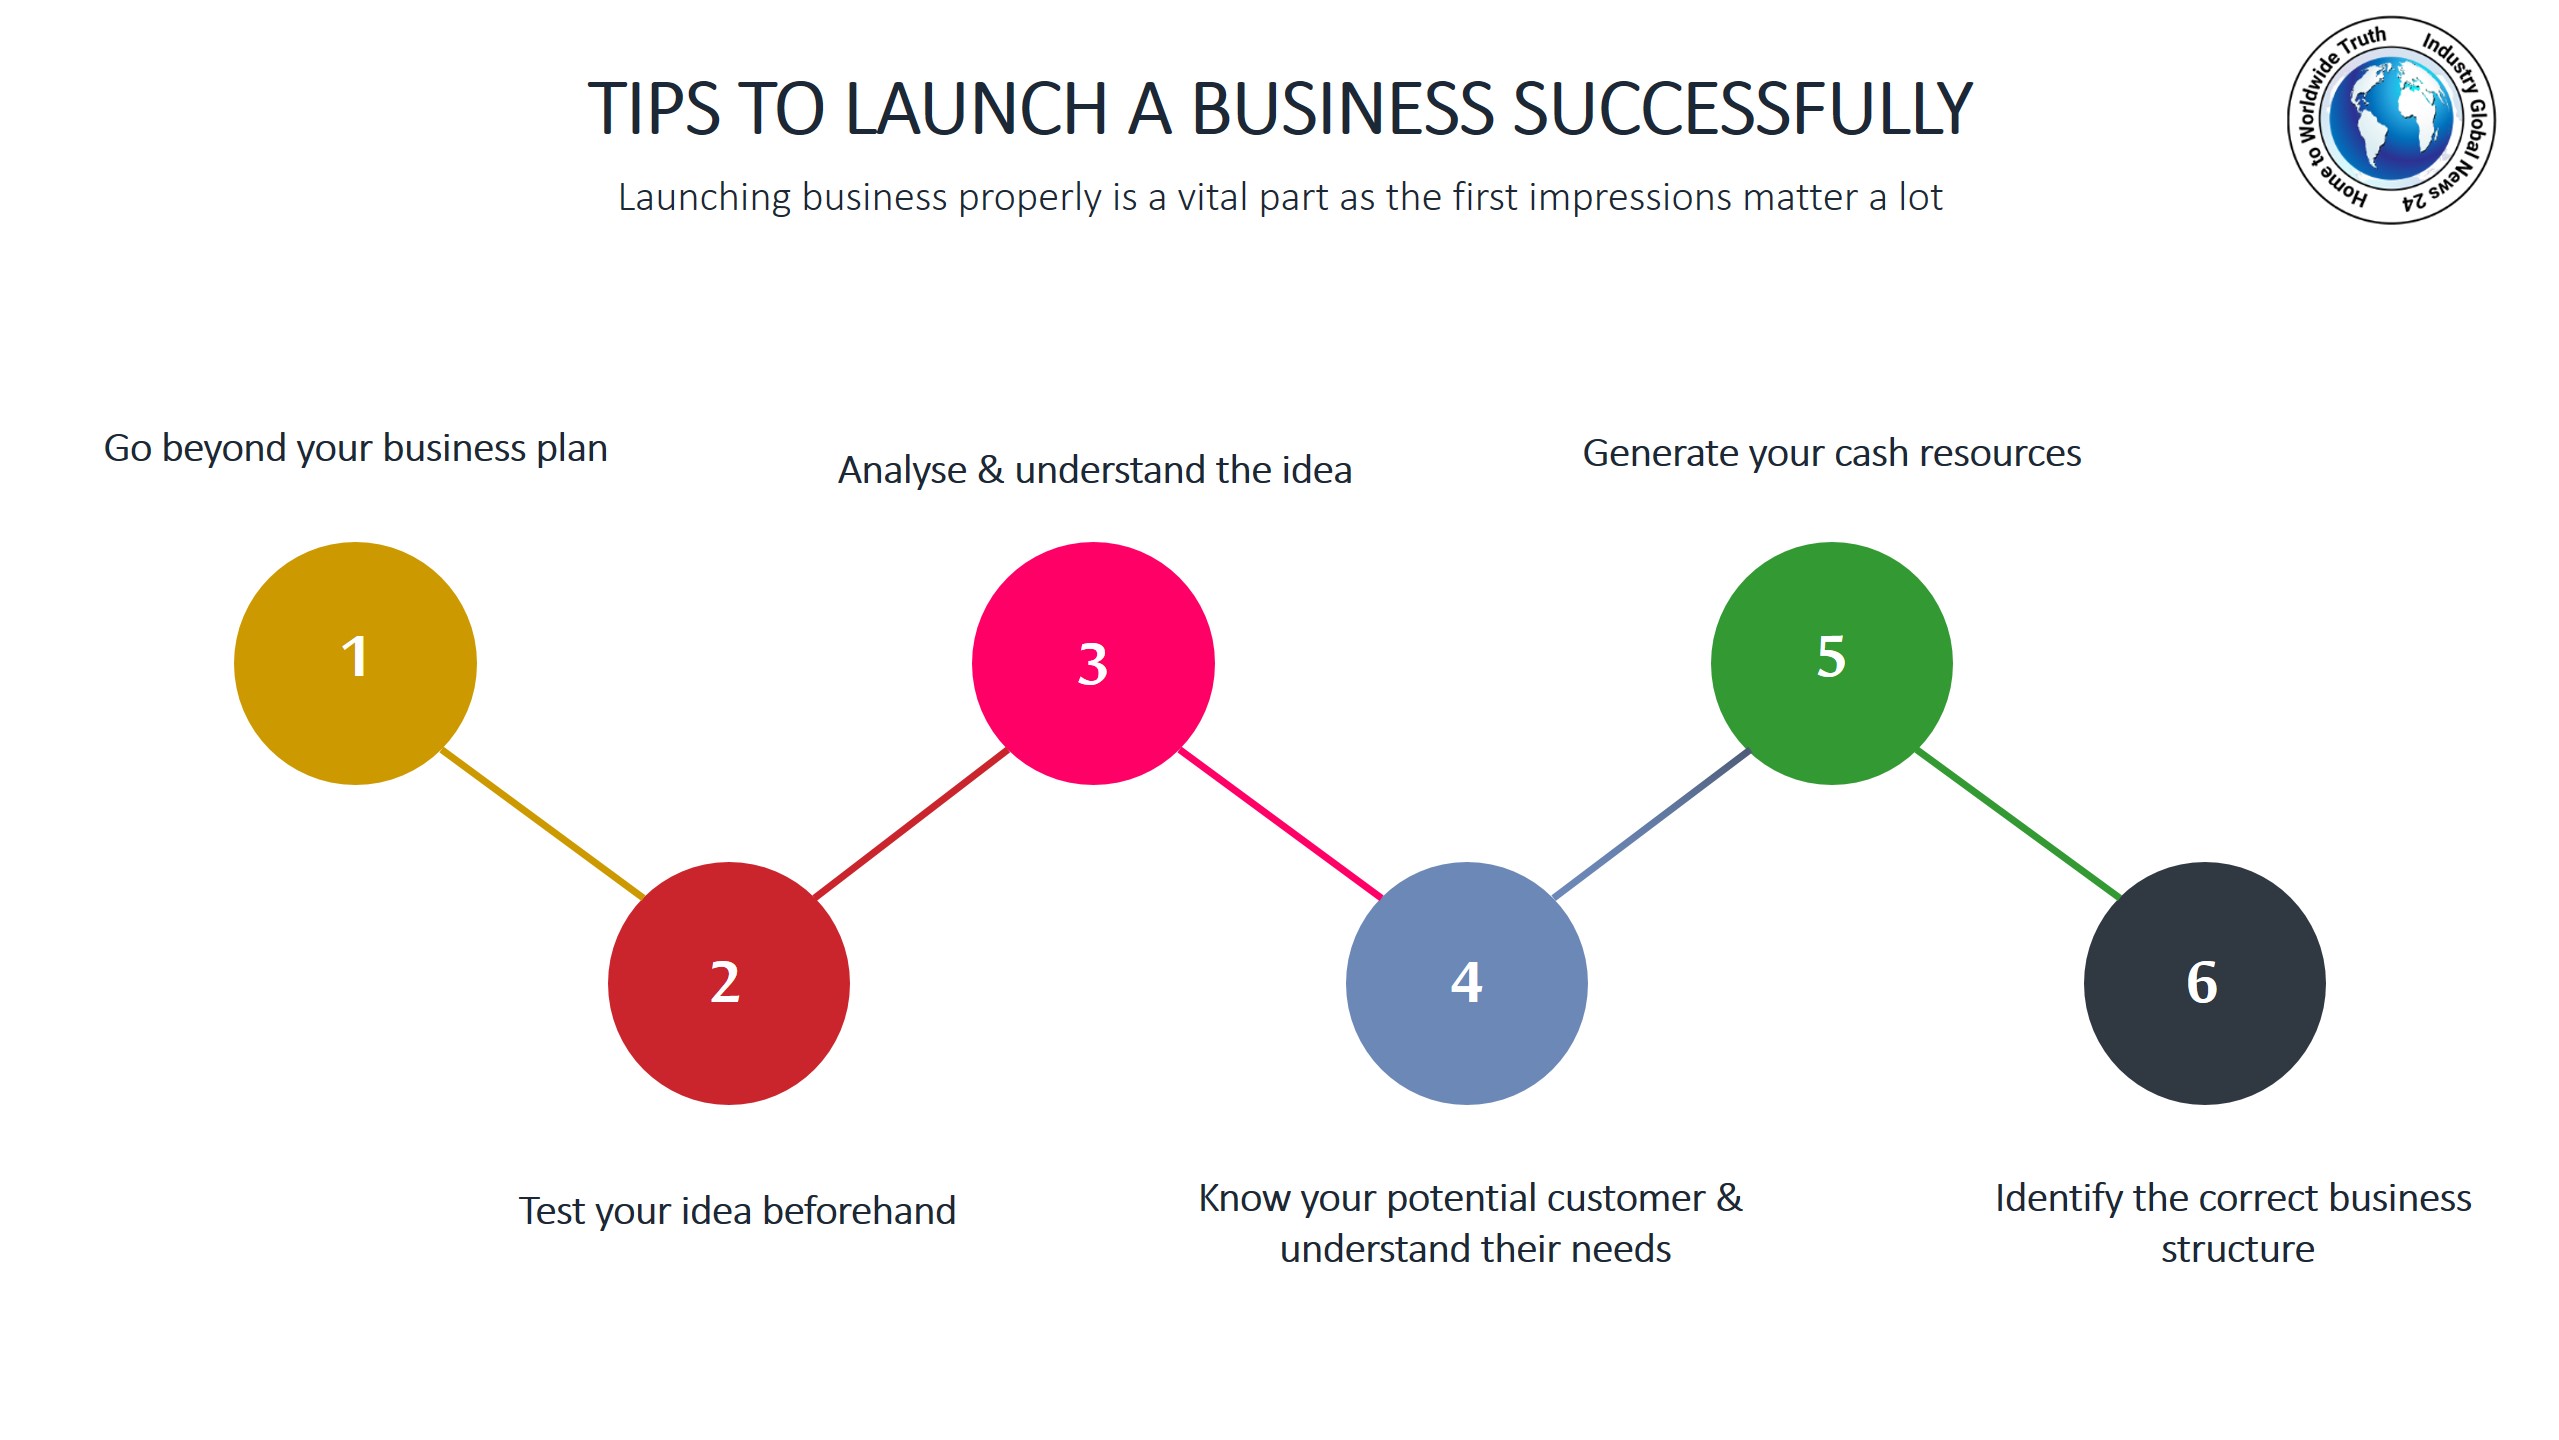 Tips to launch a business successfully